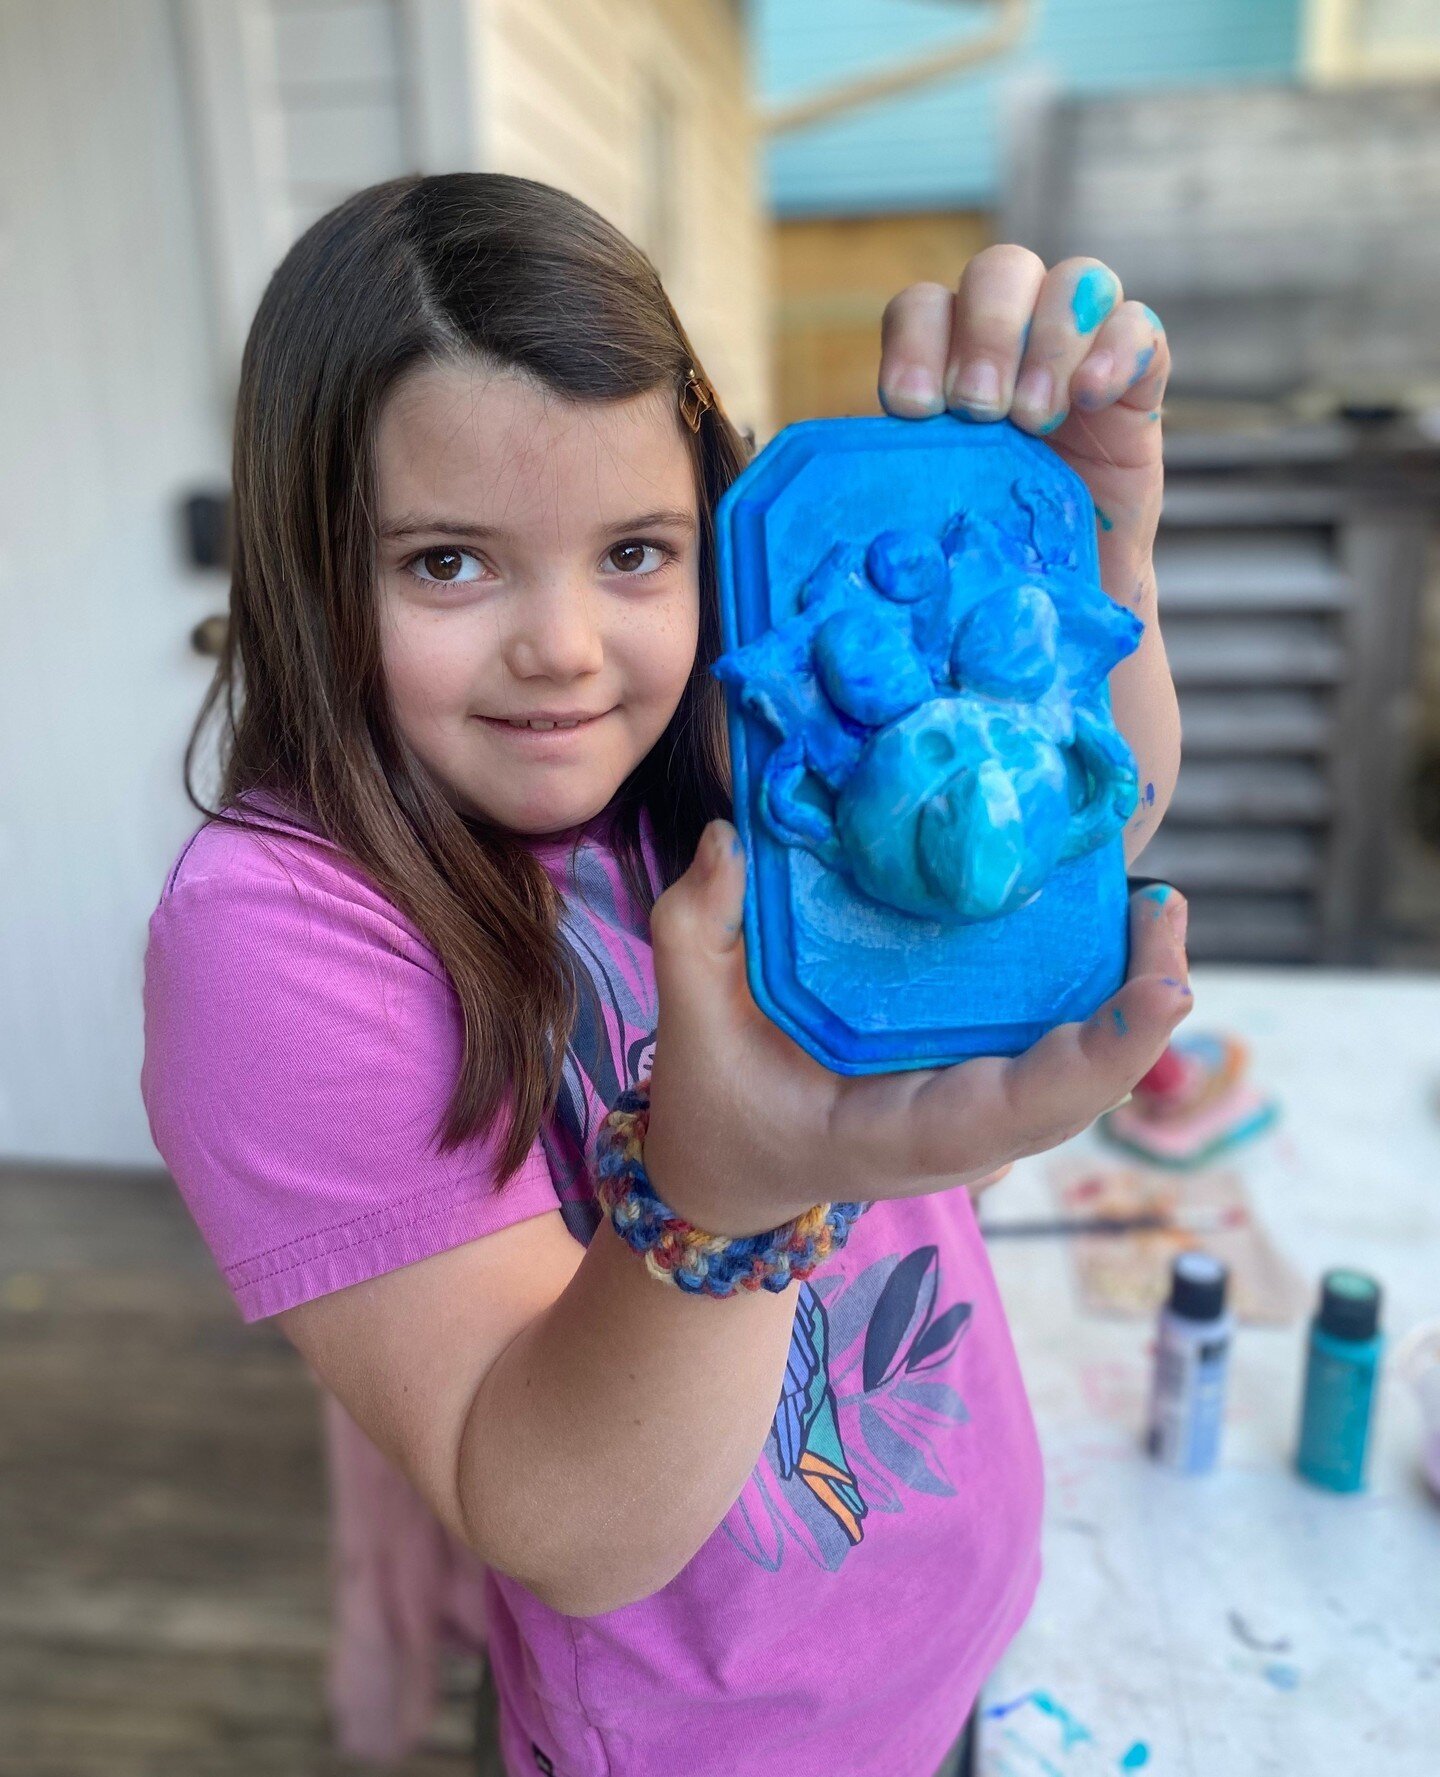 Join us for our last Visual Arts Studio of the semester, ages 6 - 10, Tuesdays 5:15 - 6:45, March 12 - May 28 at @the_tigermen_den 🎨⁠
⁠
This class is for students that want to build their visual arts skills across a variety of mediums. Students will